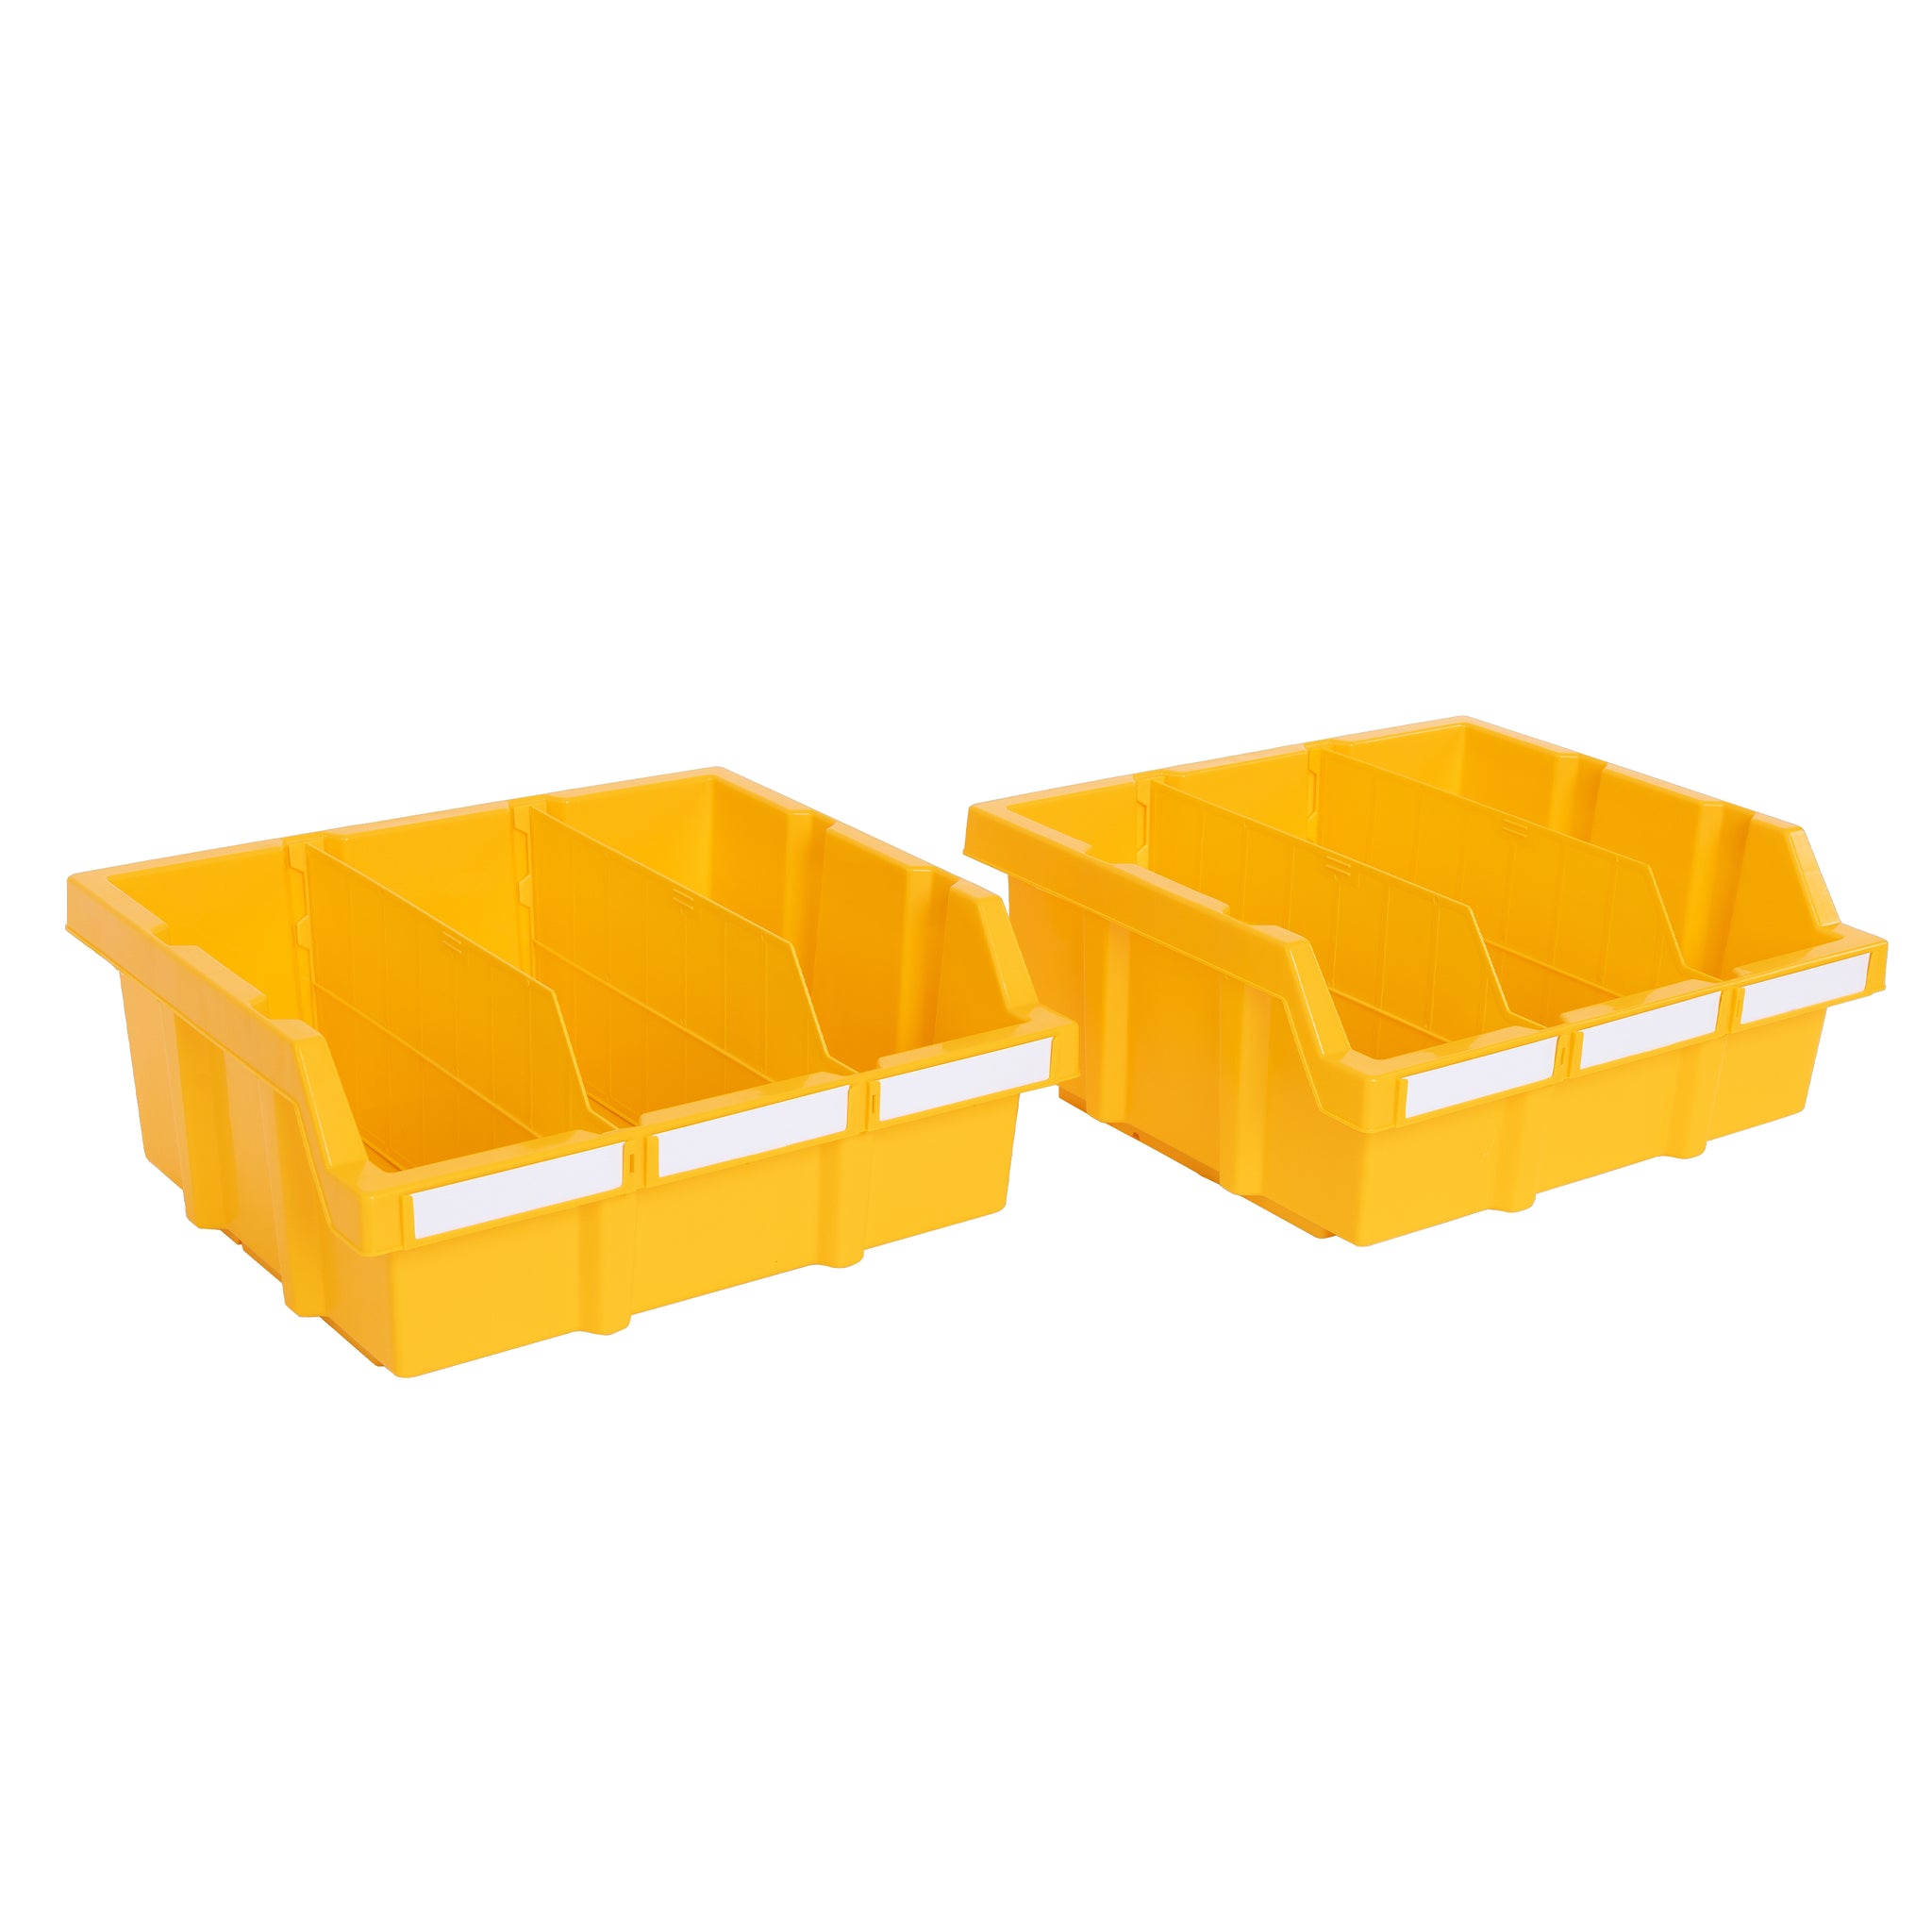 Yellow Bins or Dividers for Commercial Bin Rack – Seville Classics